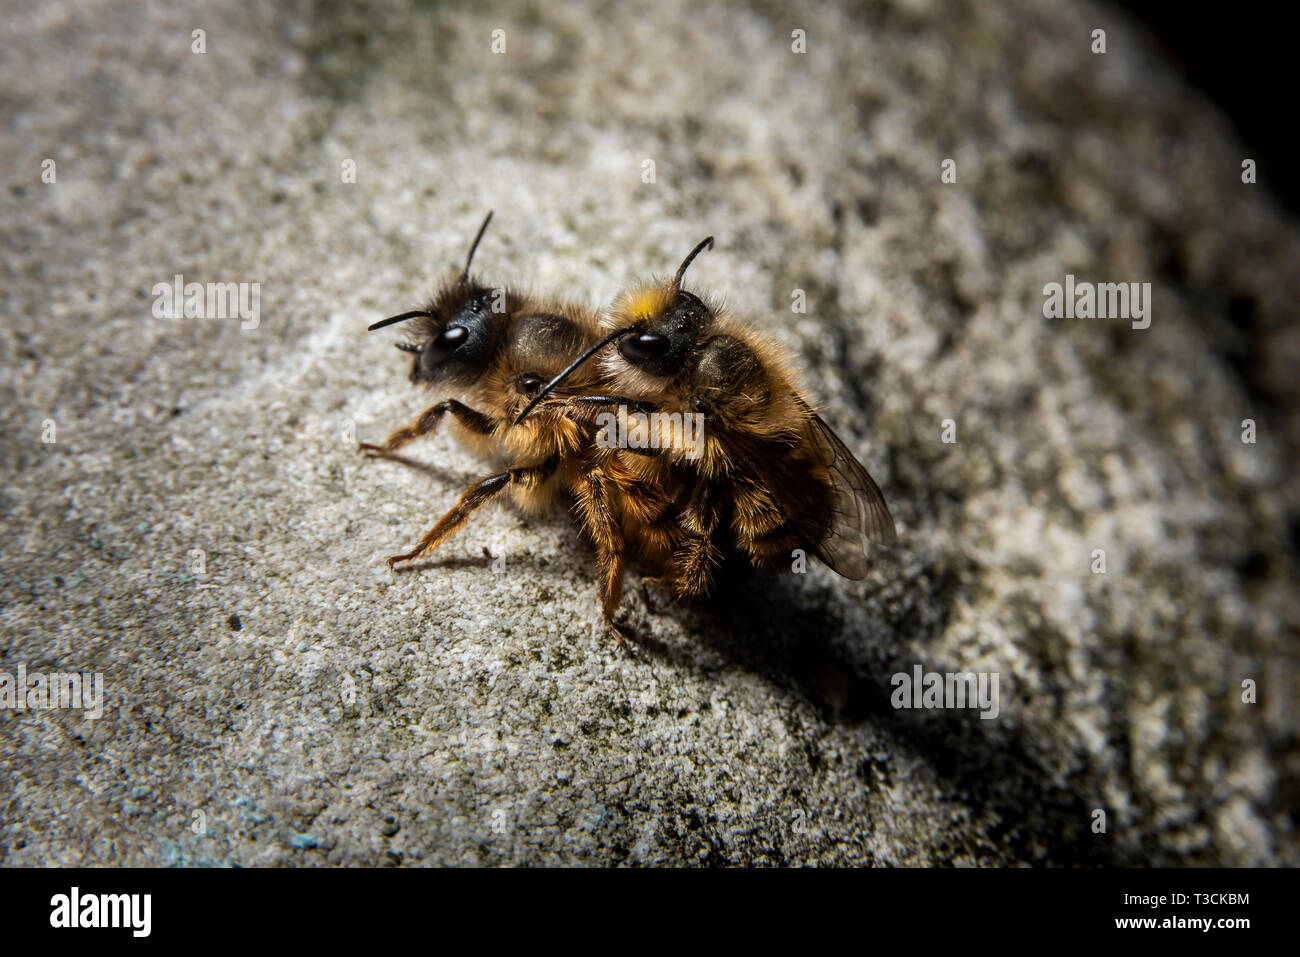 Bumblebees mating on a rock, dramatic light Stock Photo